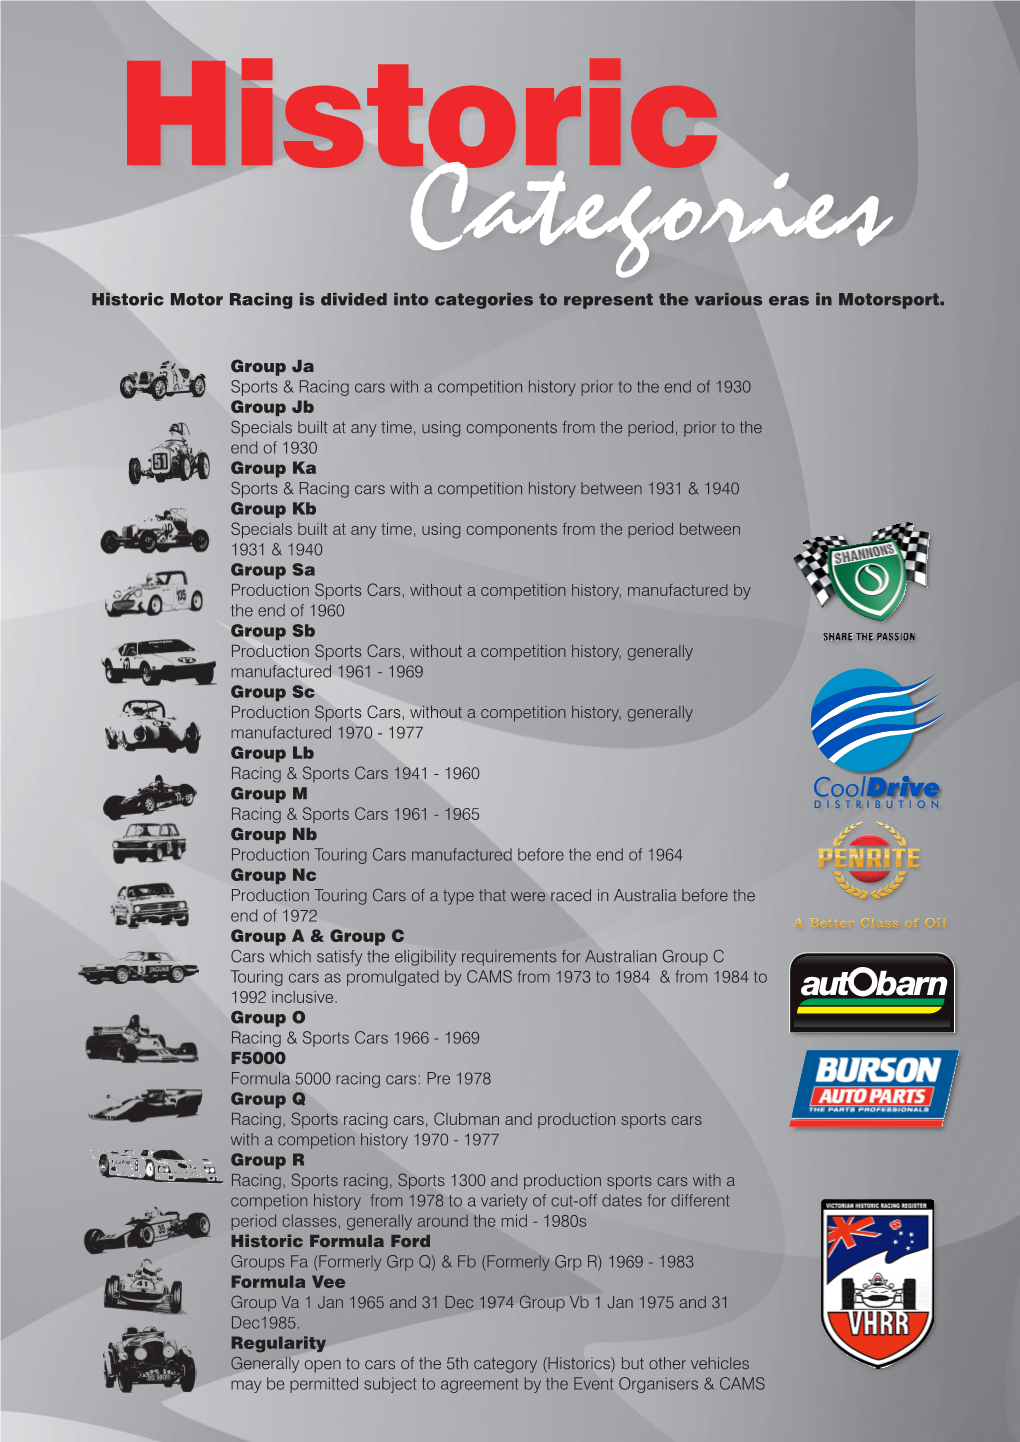 Group Ja Sports & Racing Cars with a Competition History Prior to the End